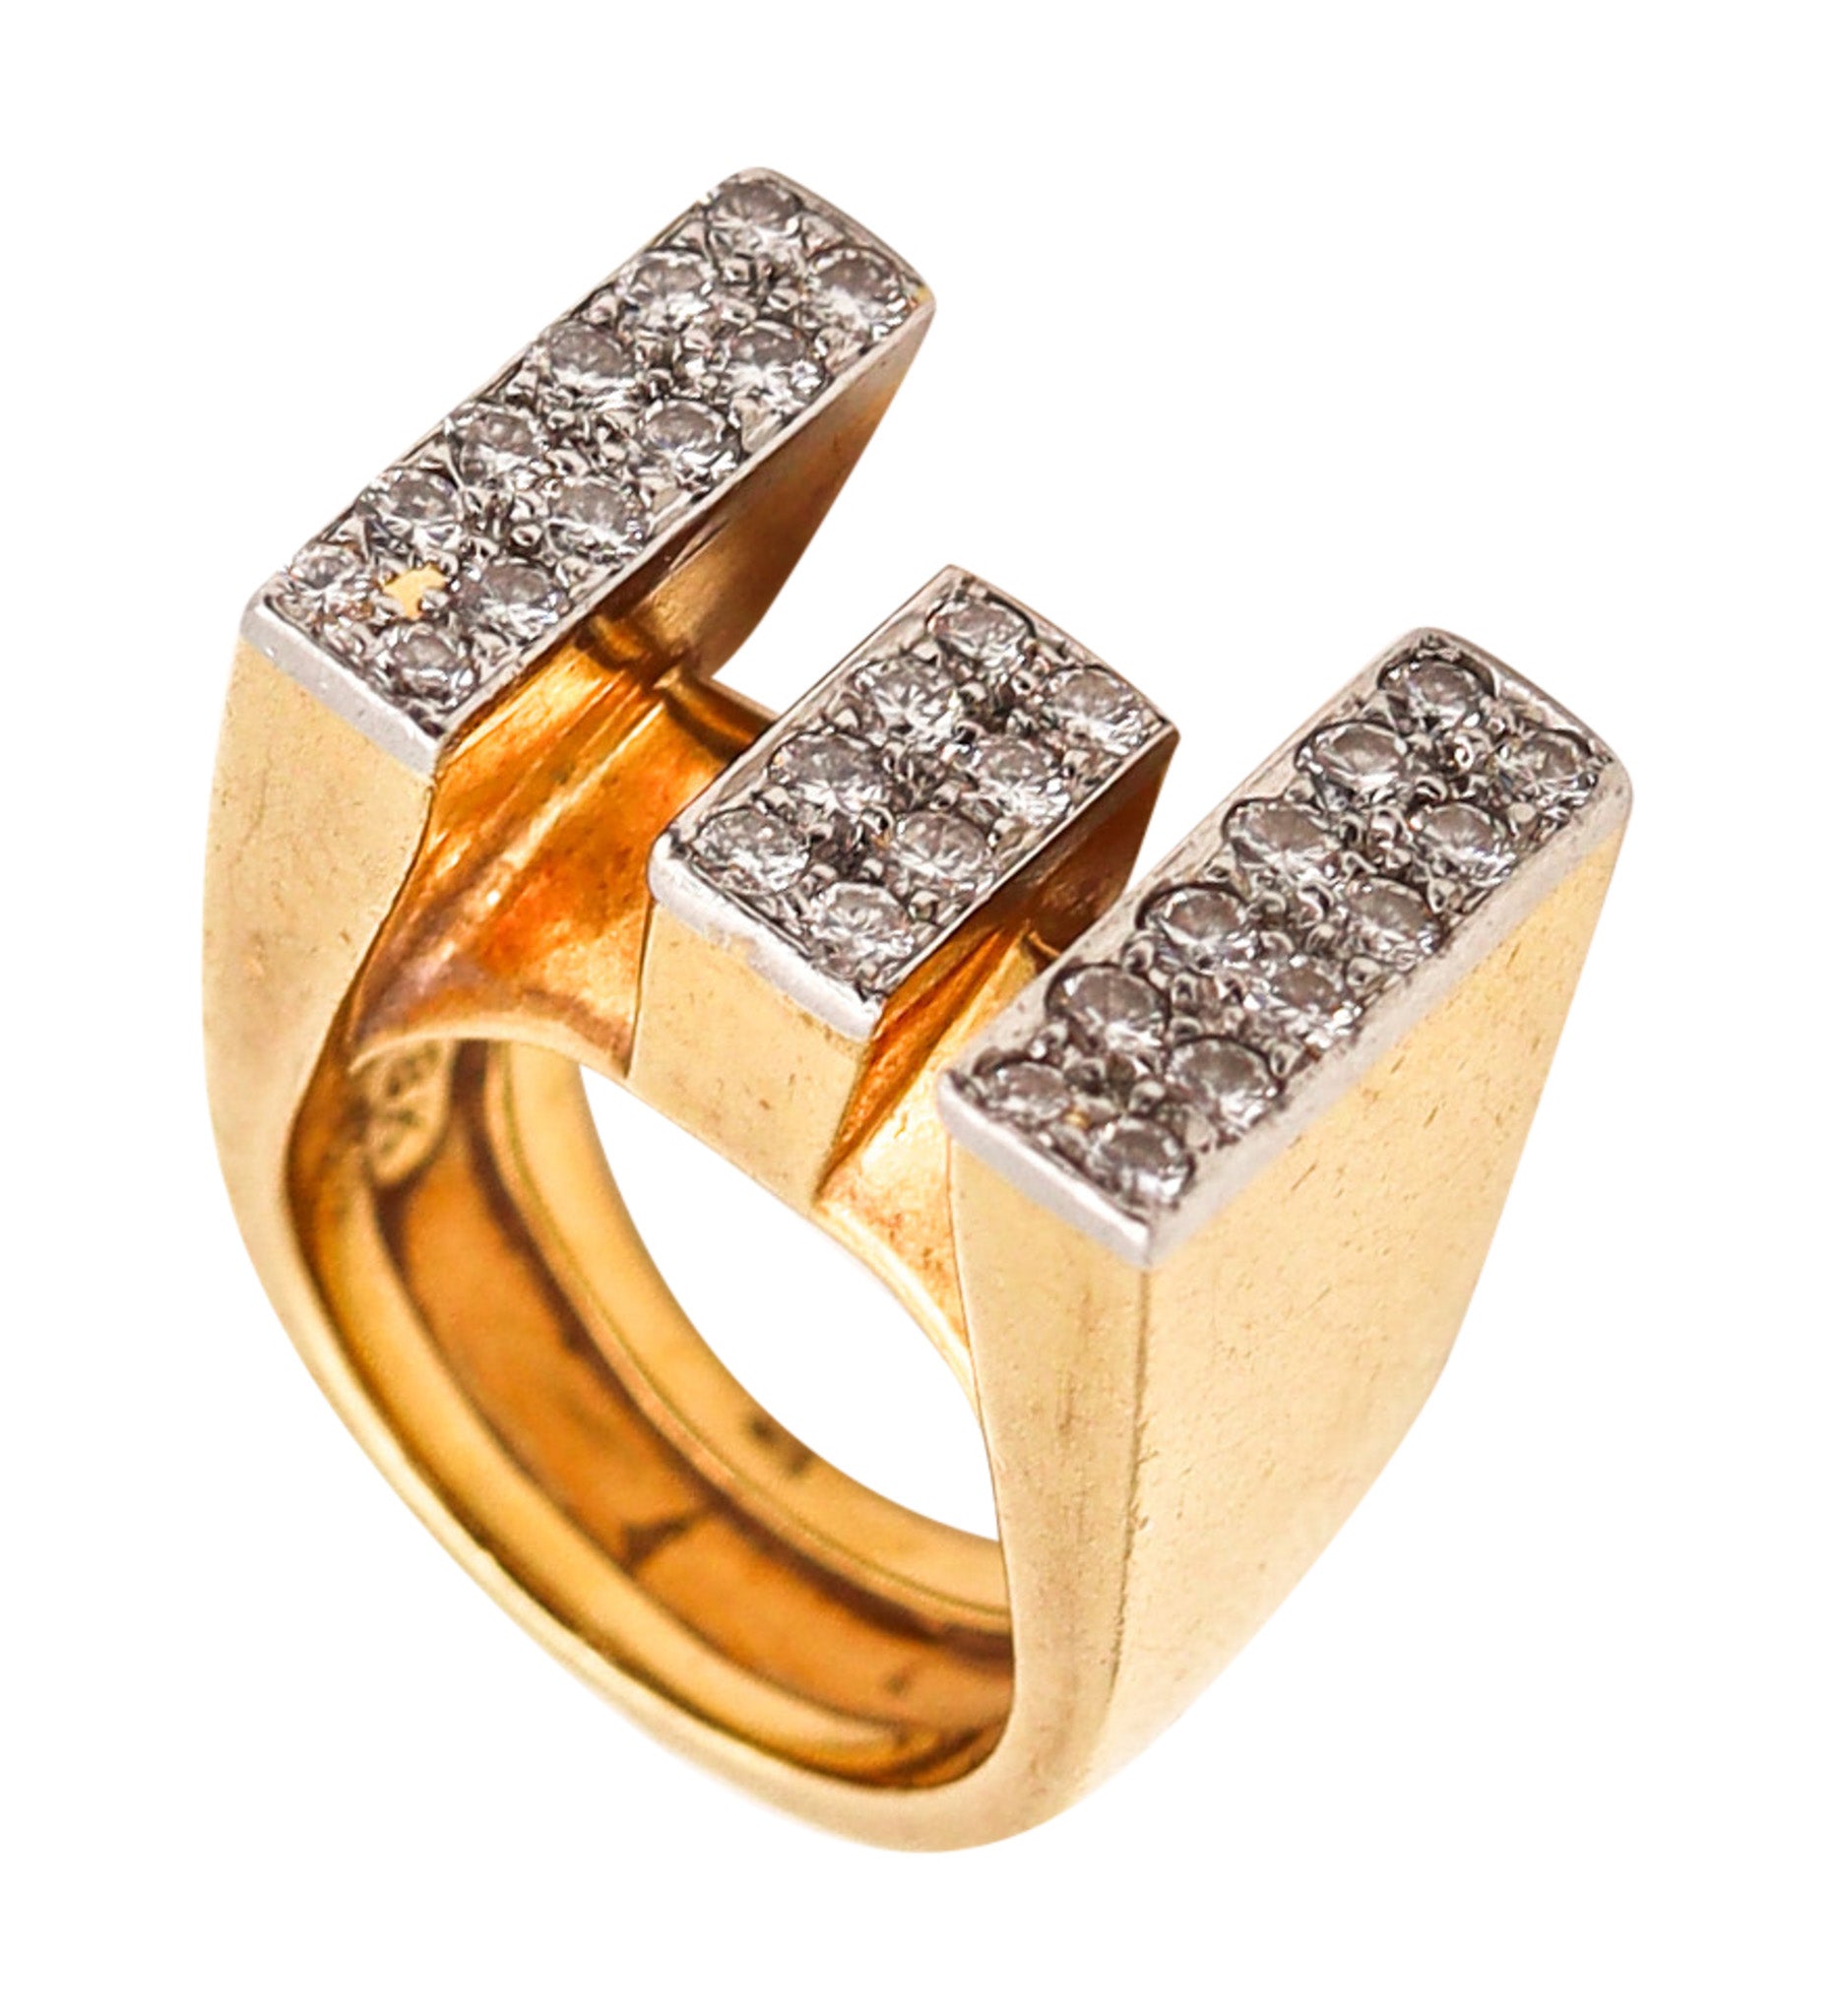 -Cartier 1970 Geometric Cocktail Ring In 18Kt Yellow Gold With 1.60 Ctw In Diamonds